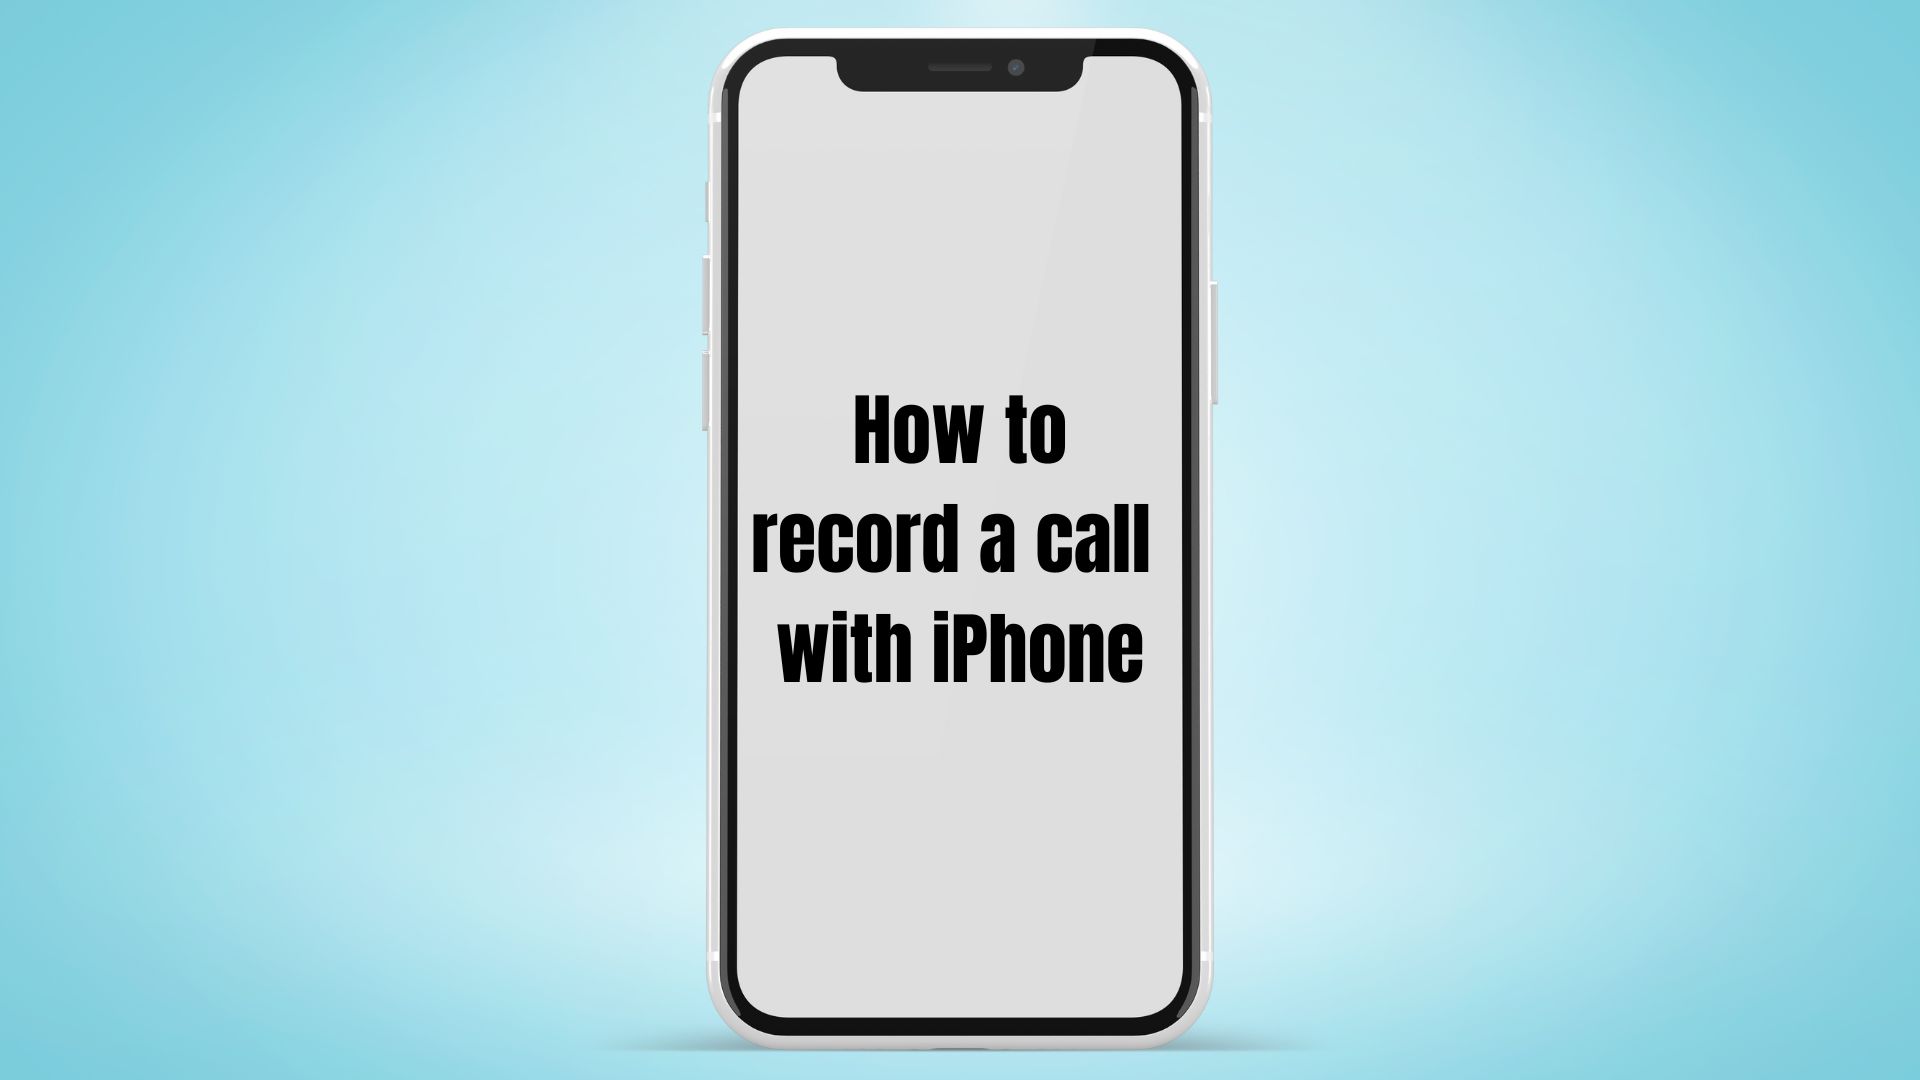 How to record a call with iPhone